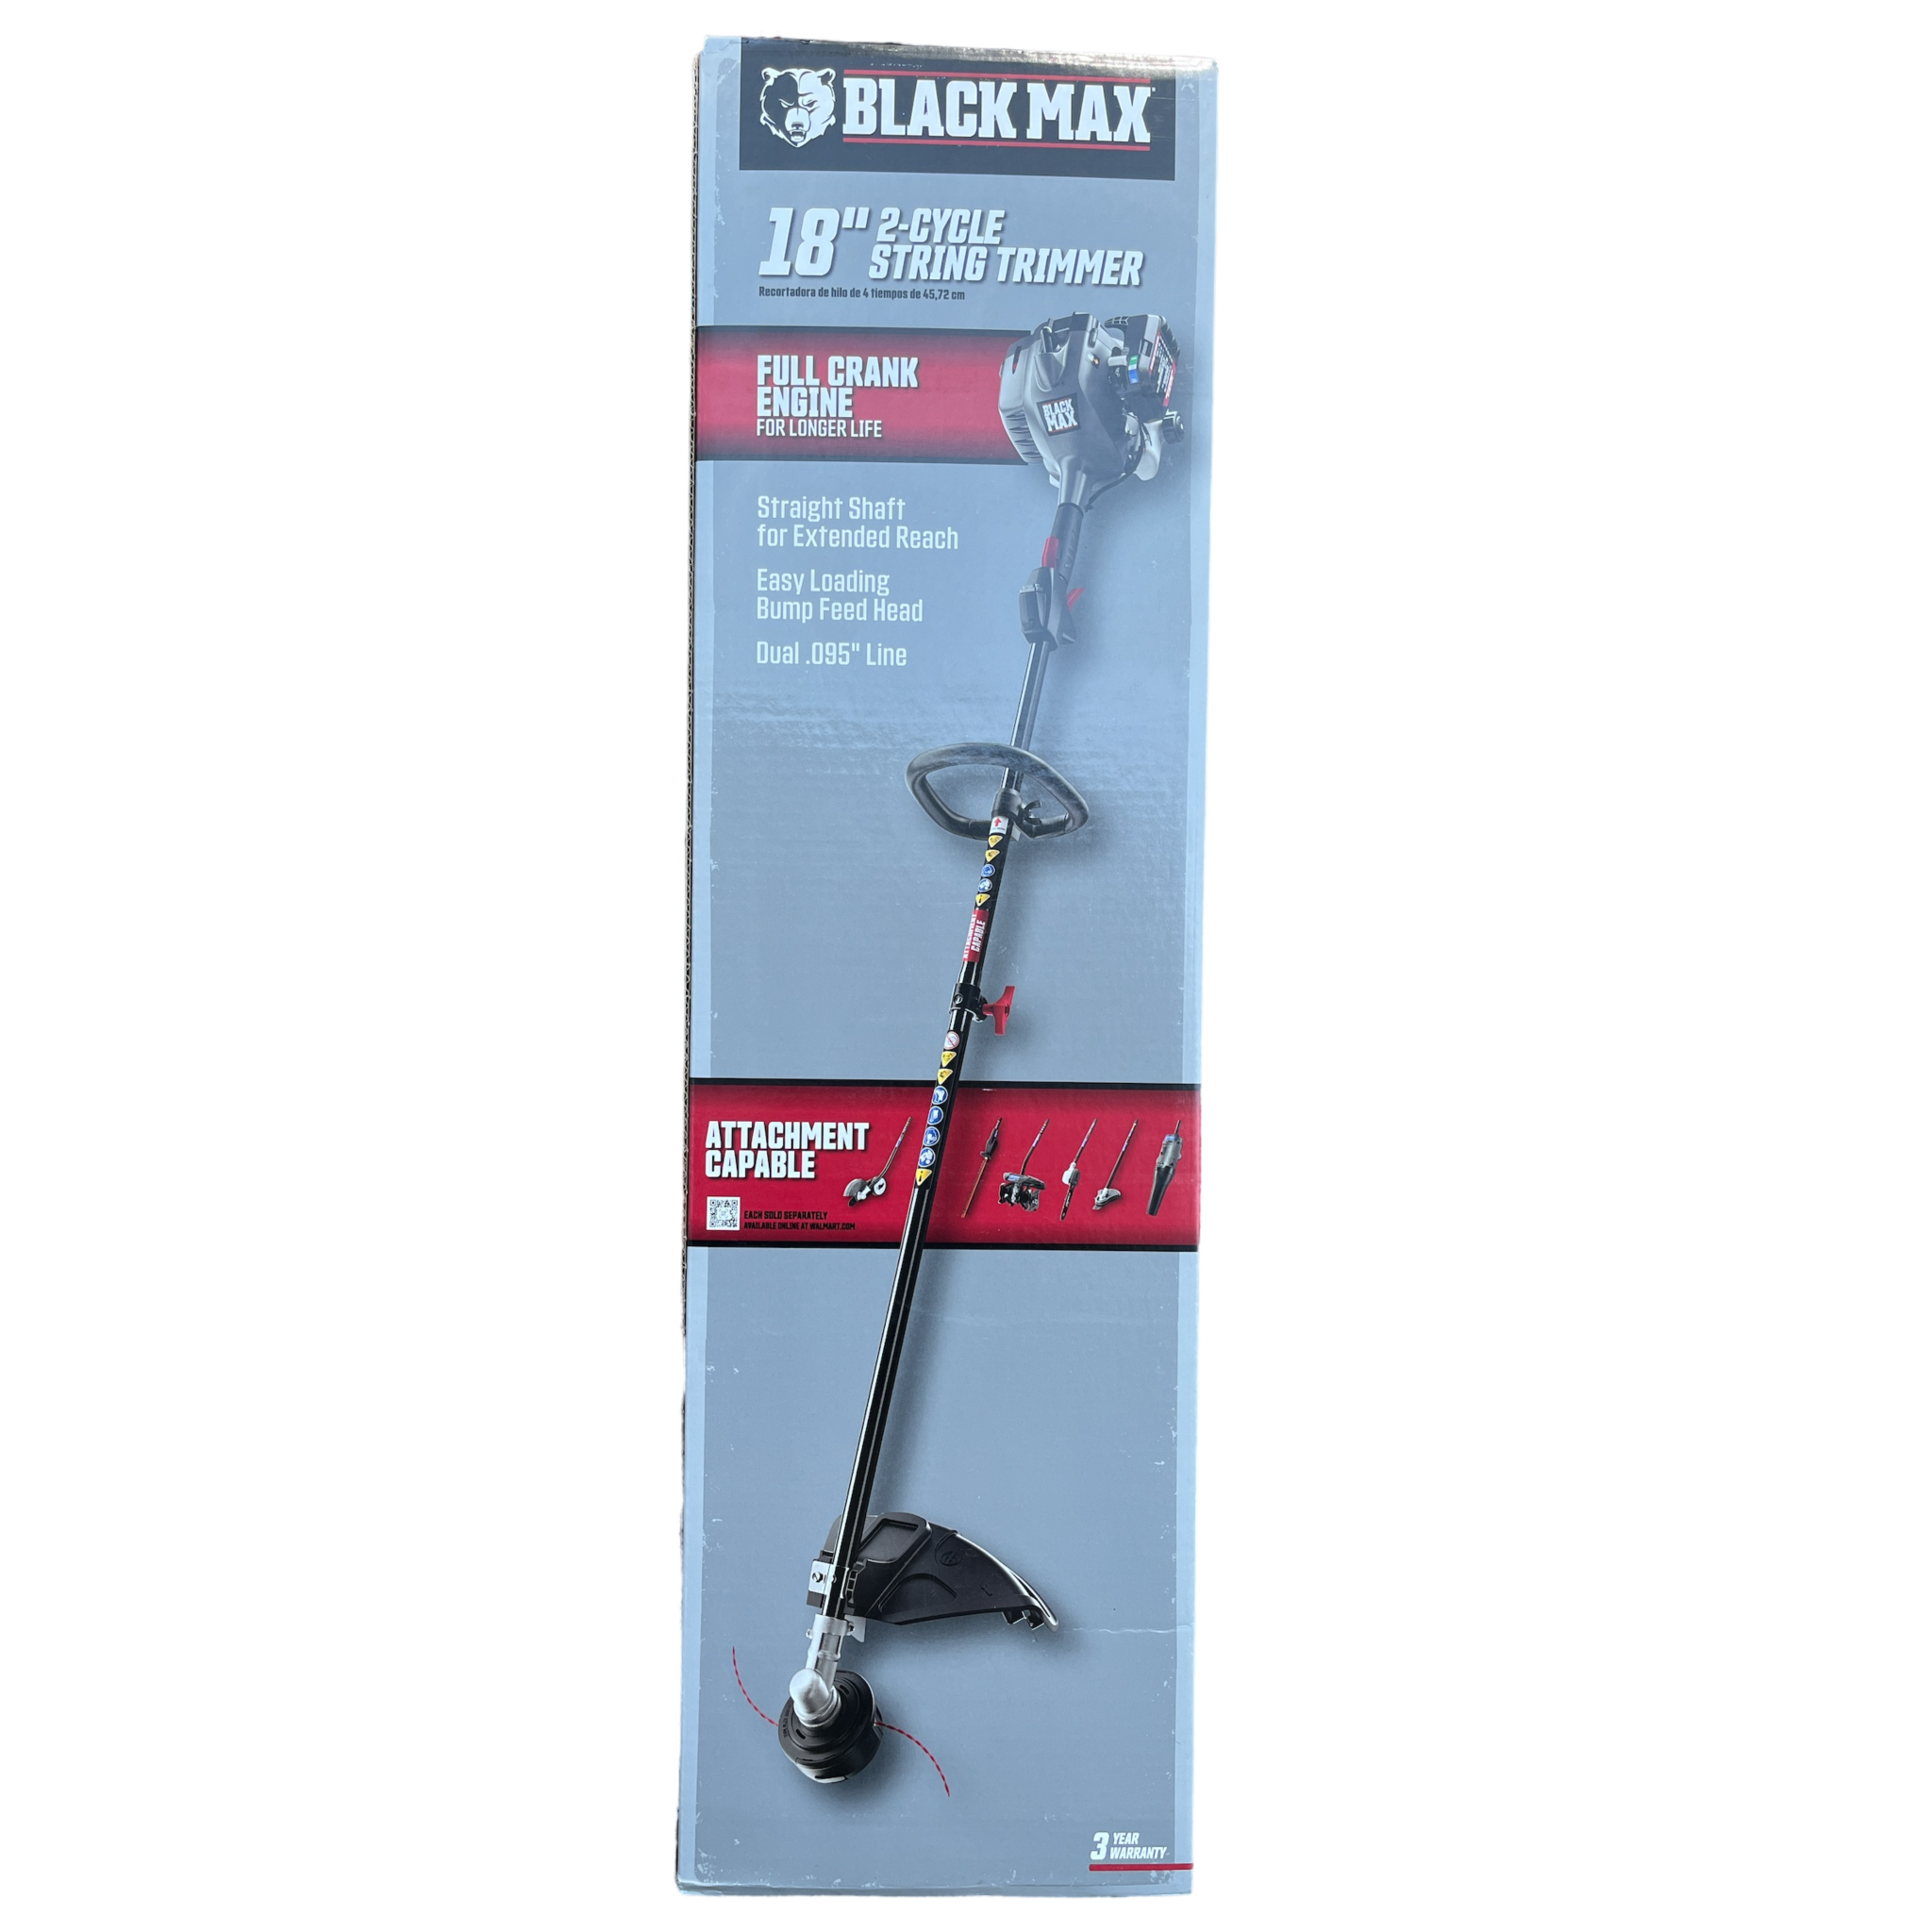 Blackmax  2-Cycle 17 Curved Shaft Attachment Capable String Trimmer